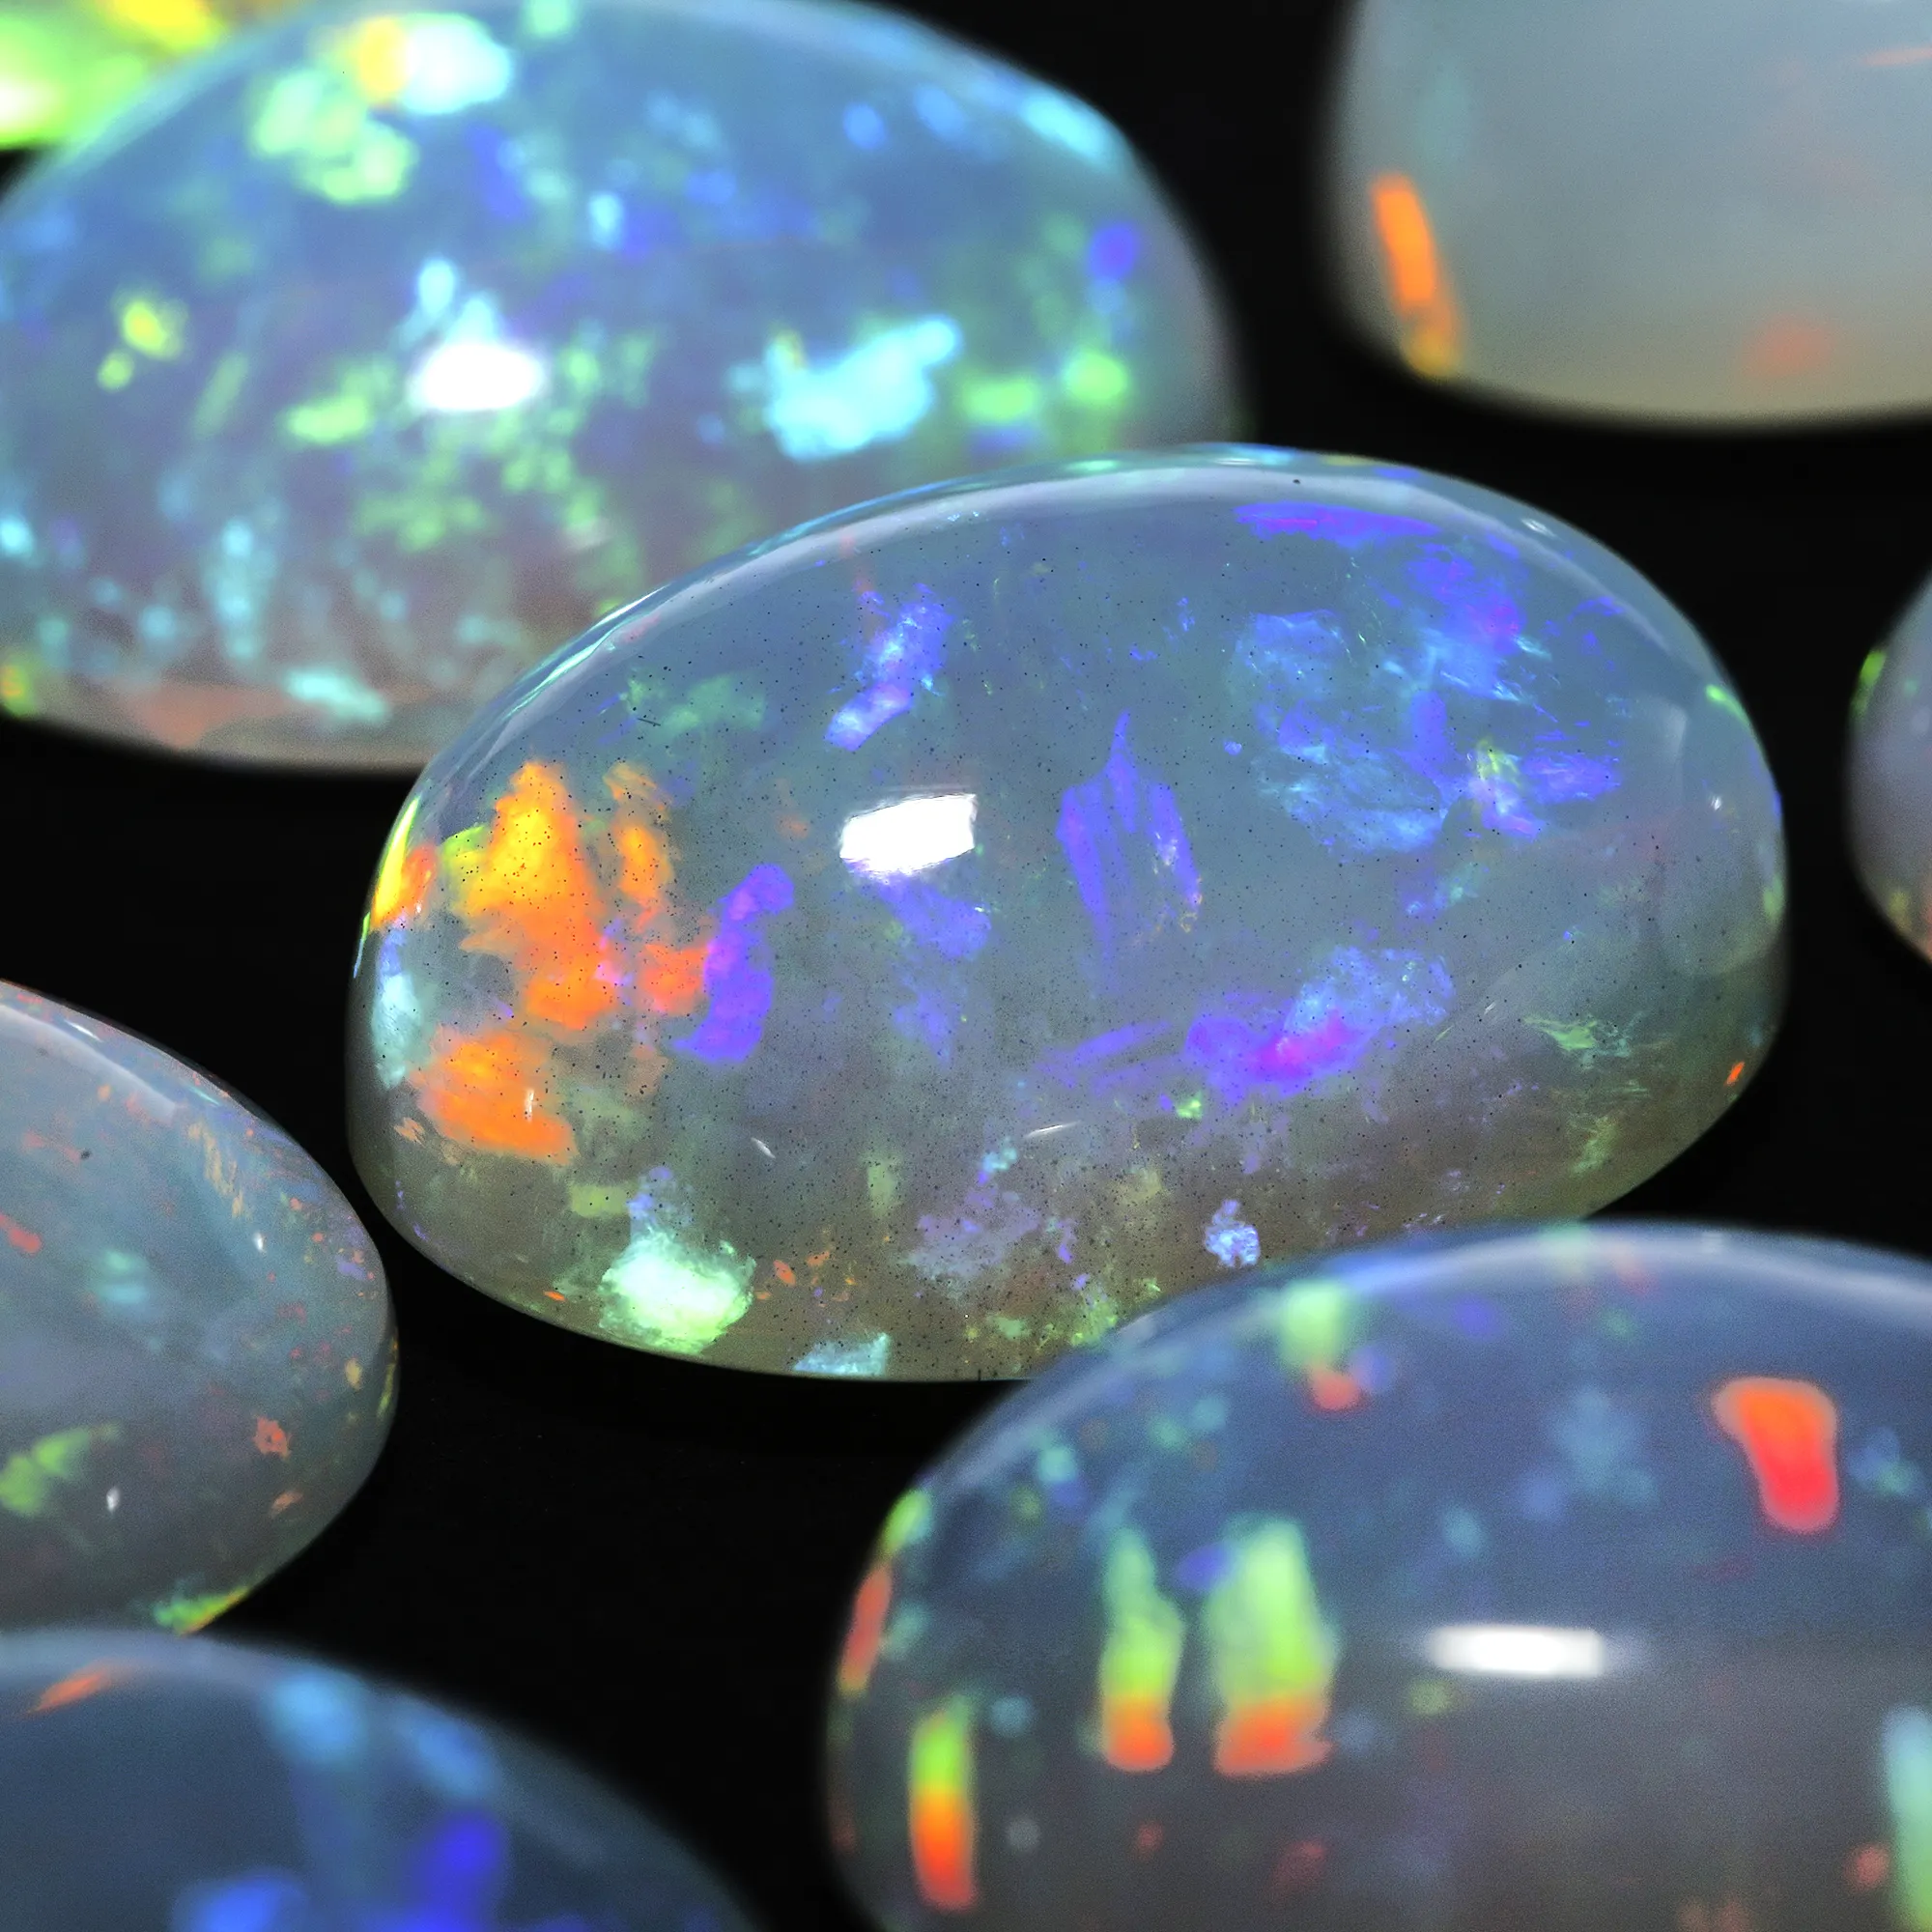 Oval 18x13mm AAA+++ Natural Ethiopian Opal Fine Quality Multi-Fire Cabochon Loose Gemstone for Making Jewelry Loose Gemstone